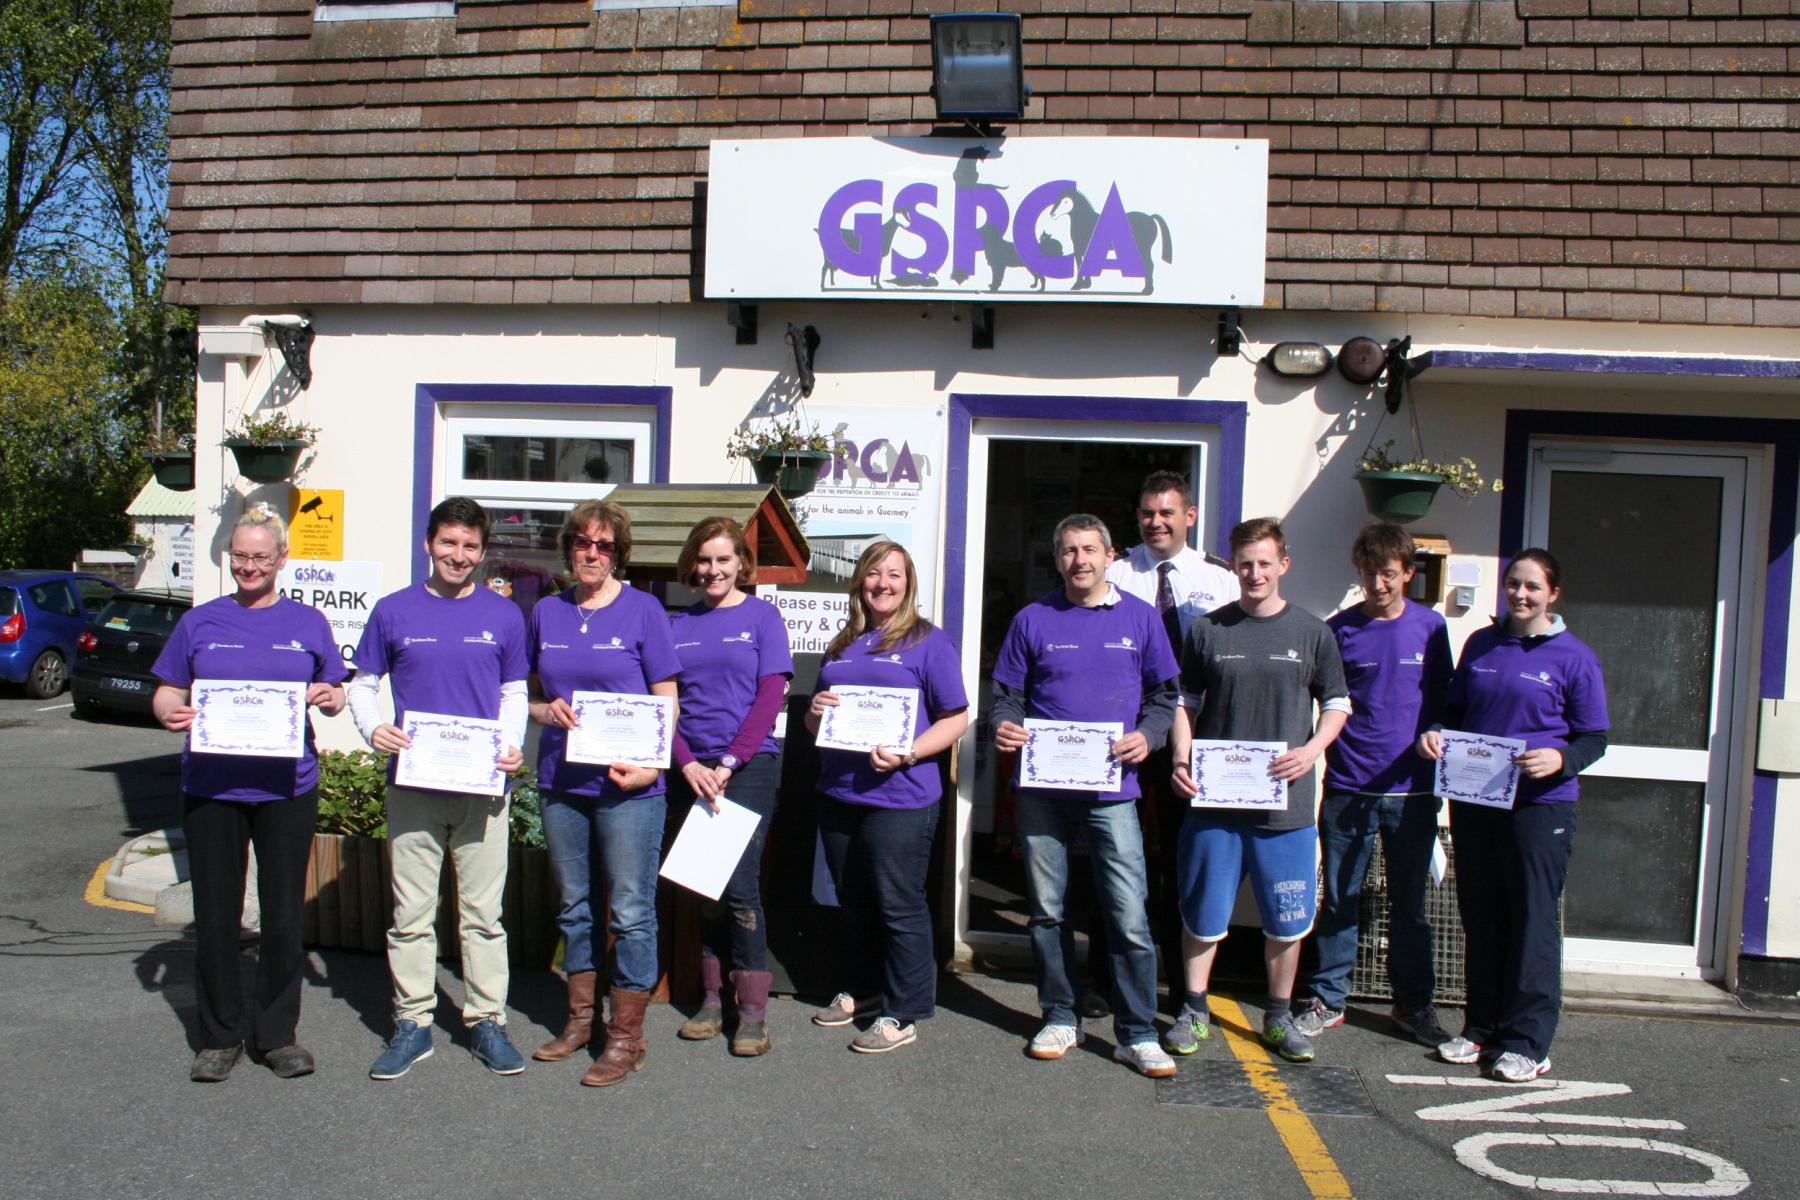 Northern Trust staff helping at the GSPCA Animal Shelter in Guernsey